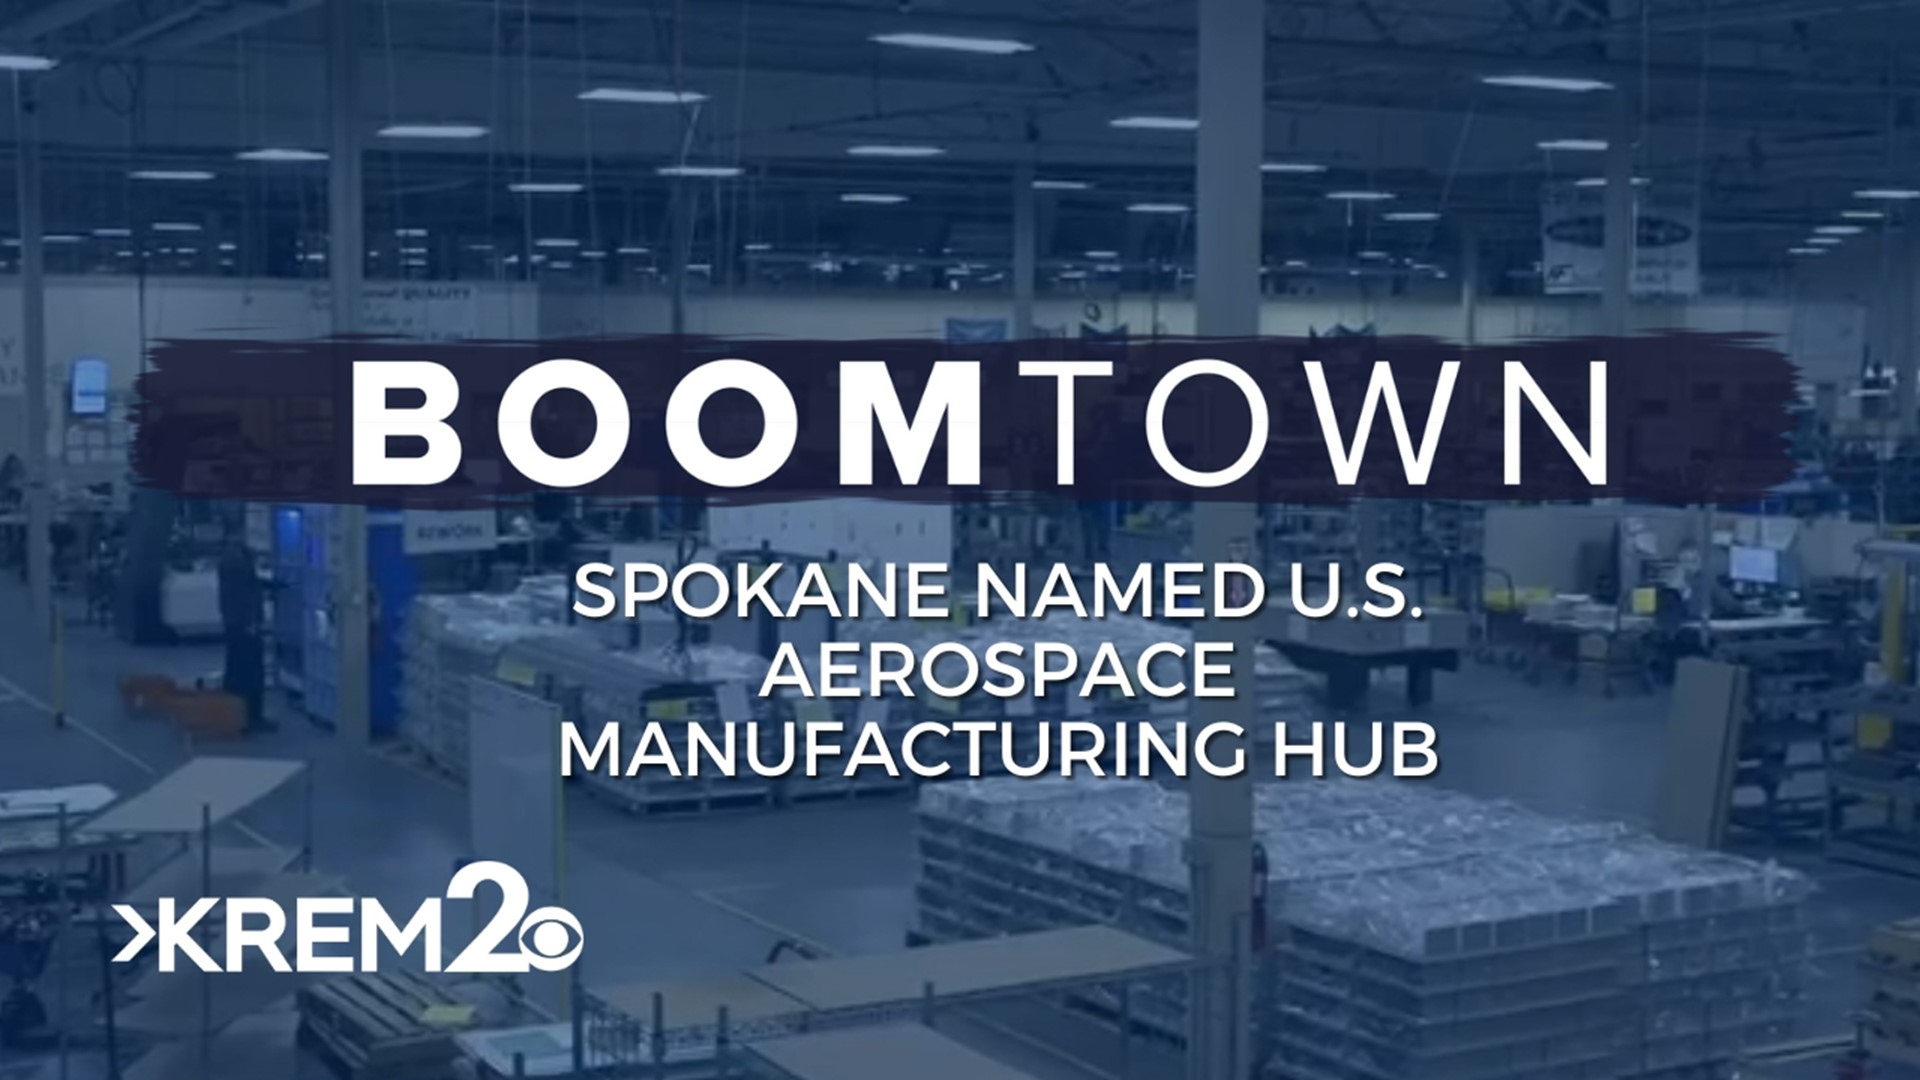 The decision was made by the Department of Commerce's Economic Development Administration (EDA) who picked Spokane out of nearly 200 applications.